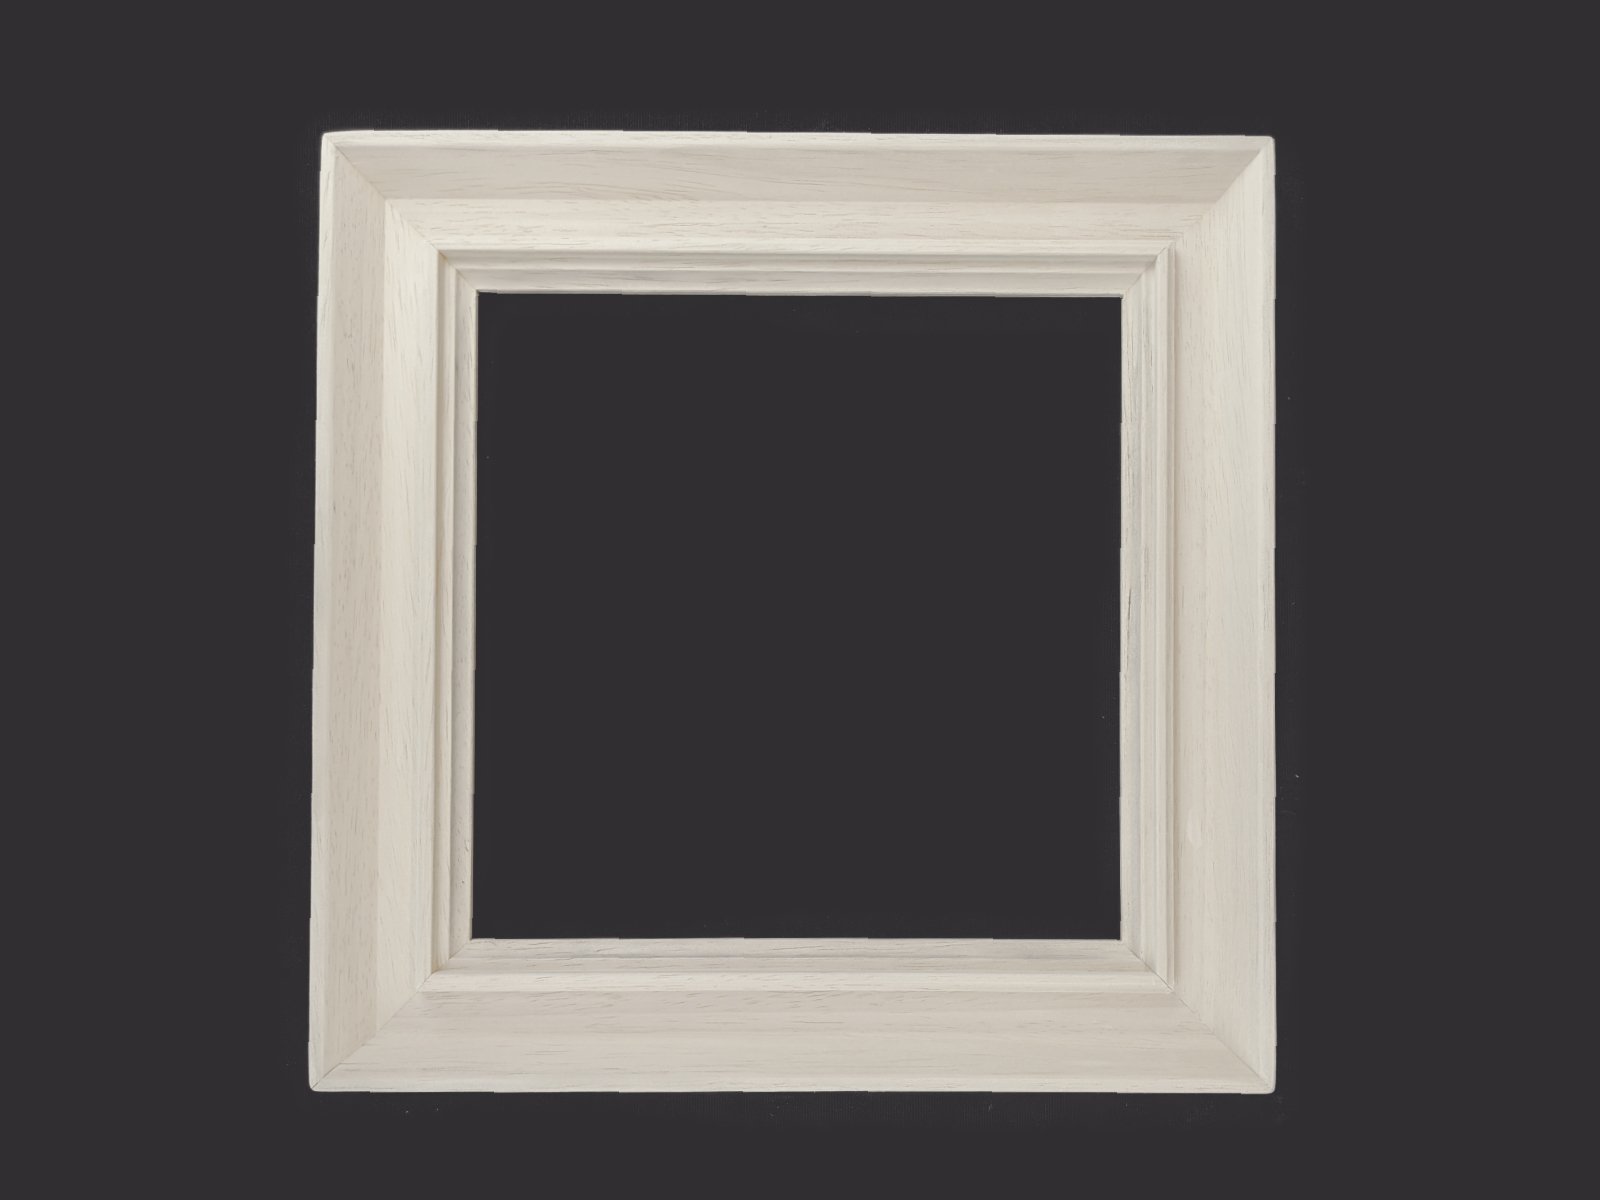 Tradtitional Gessoed Wild Frames – 36O, Small Square